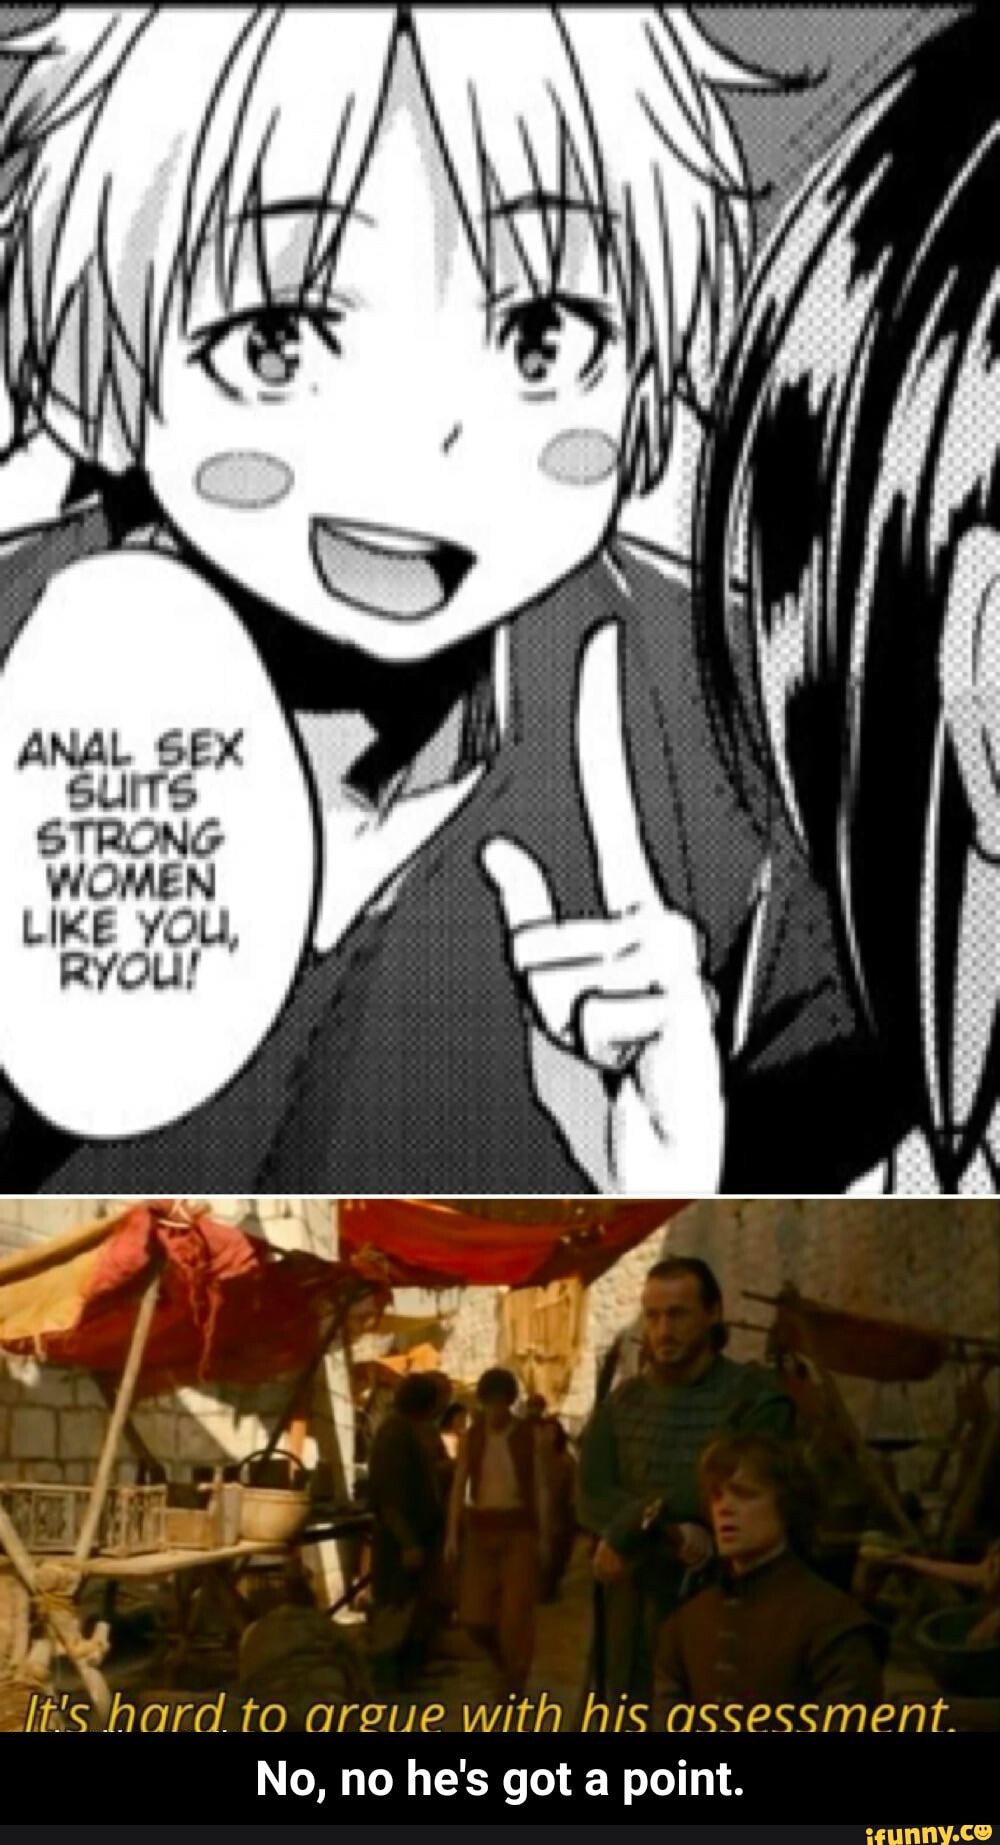 ANAL SEX SuITS STRONG WOMEN LIKE YOU, RYOU! Its hard to argue with his assessment picture